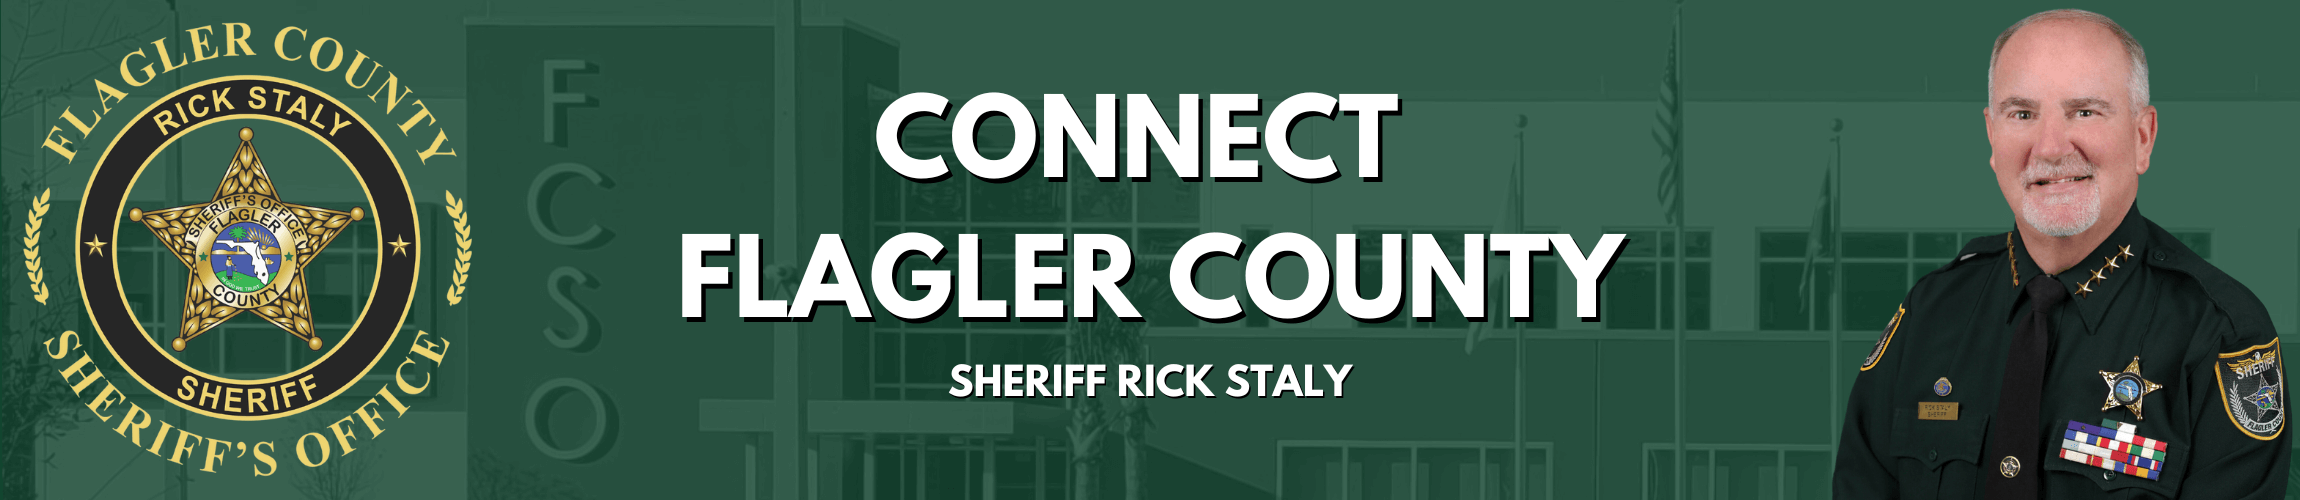 Connect Flagler County - Sheriff Rick Staly